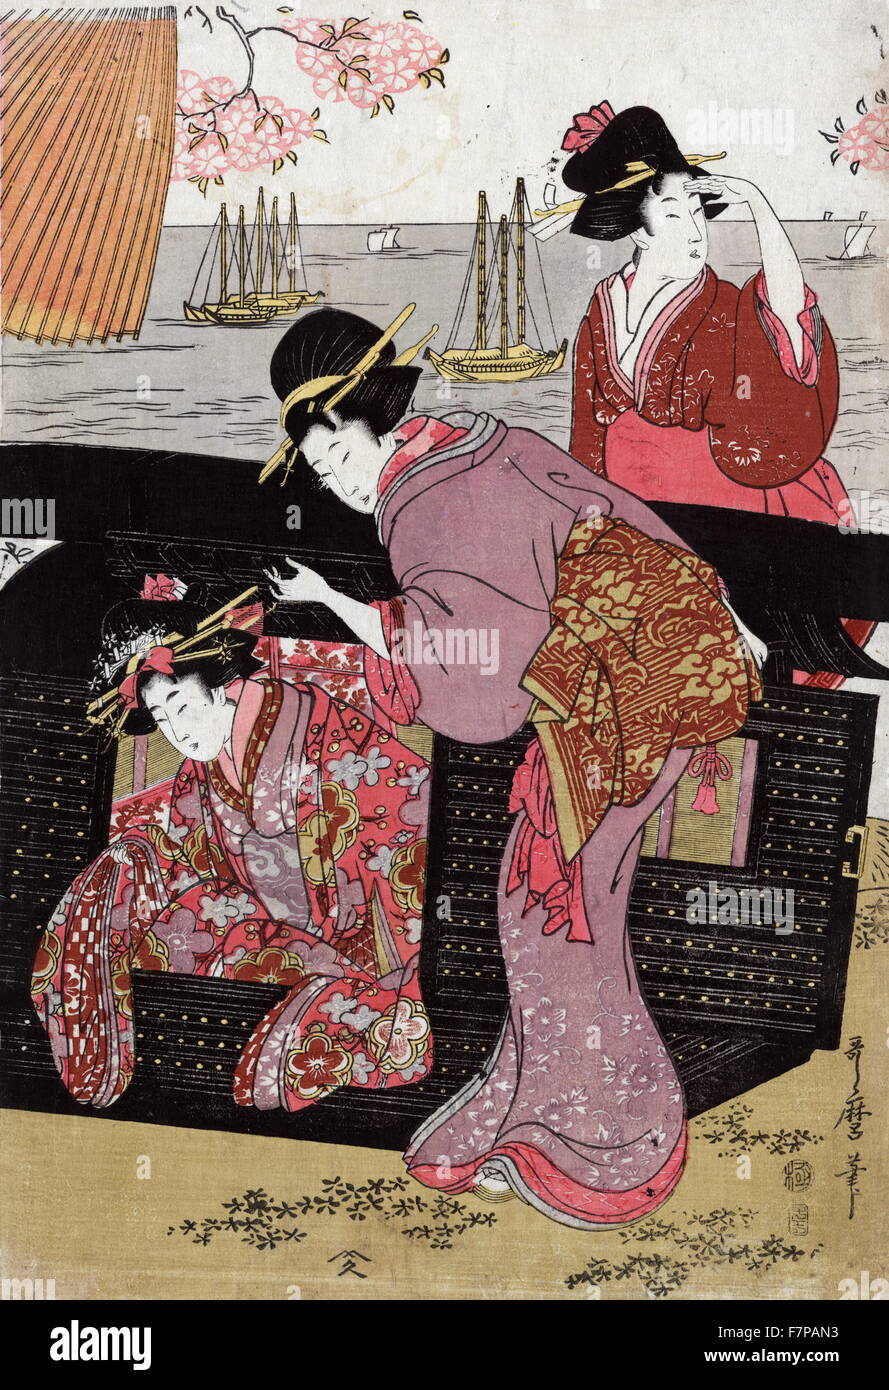 Cherry-viewing at Gotenyama by Utamaro Kitagawa (1753-1806). Print of a woman helping another woman get out of a sedan chair and another woman standing behind the chair, with cherry blossoms above and sailboats in the background. Stock Photo